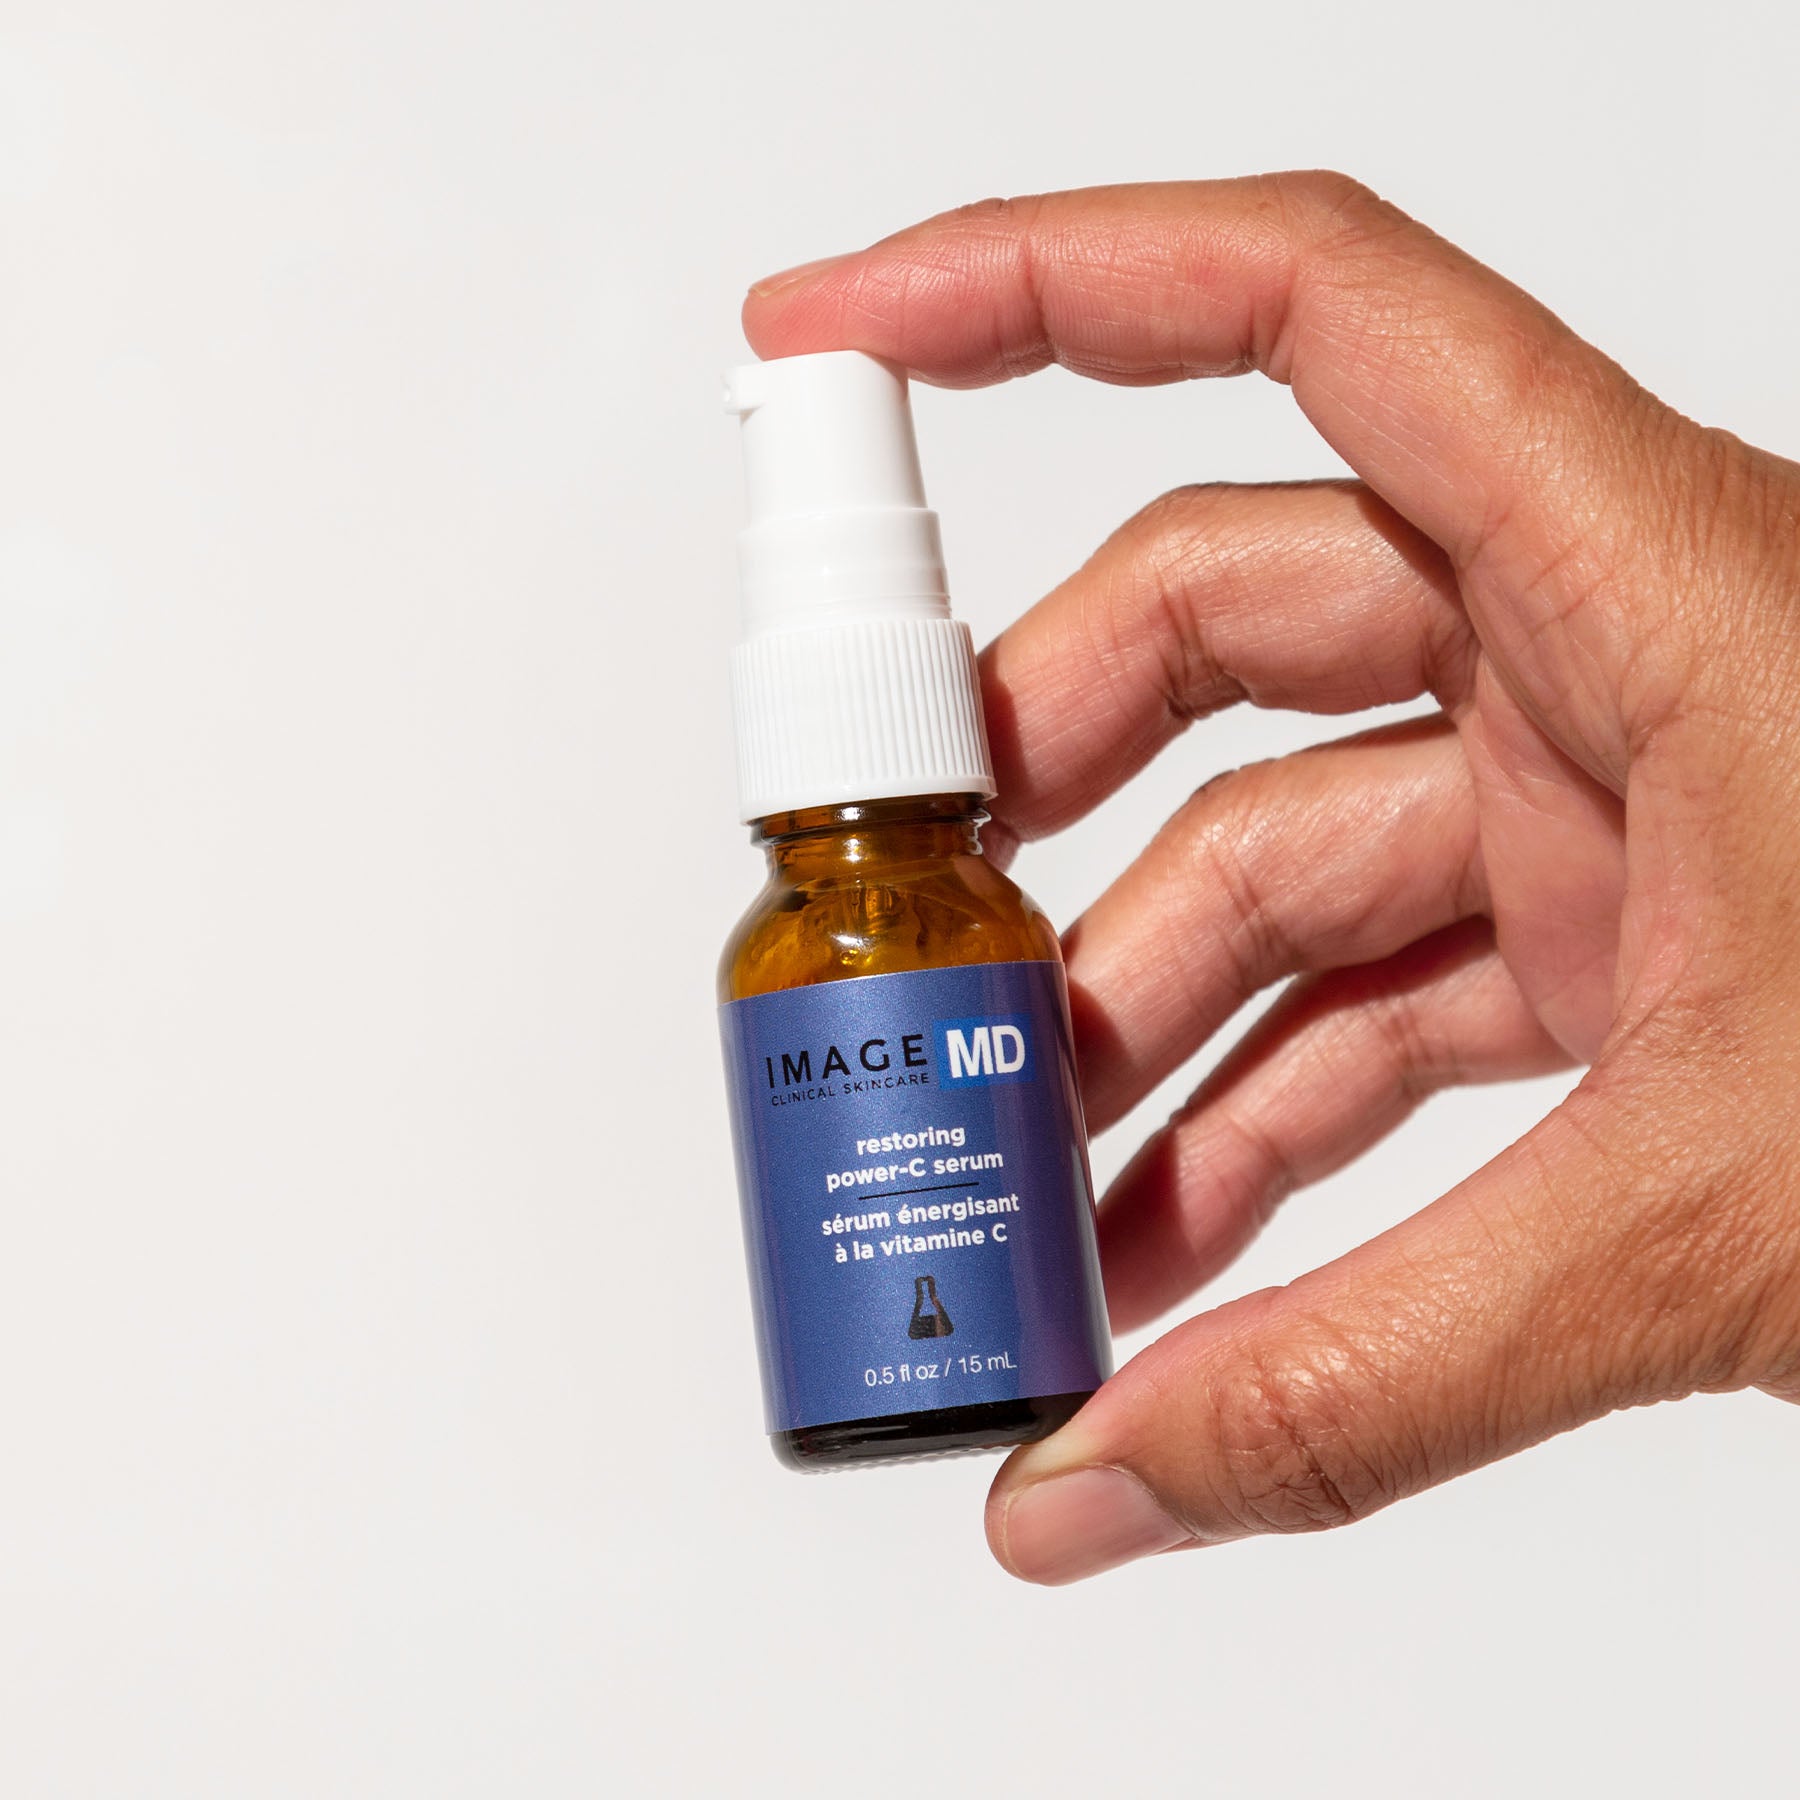 Discovery-size IMAGE MD® restoring power-C serum